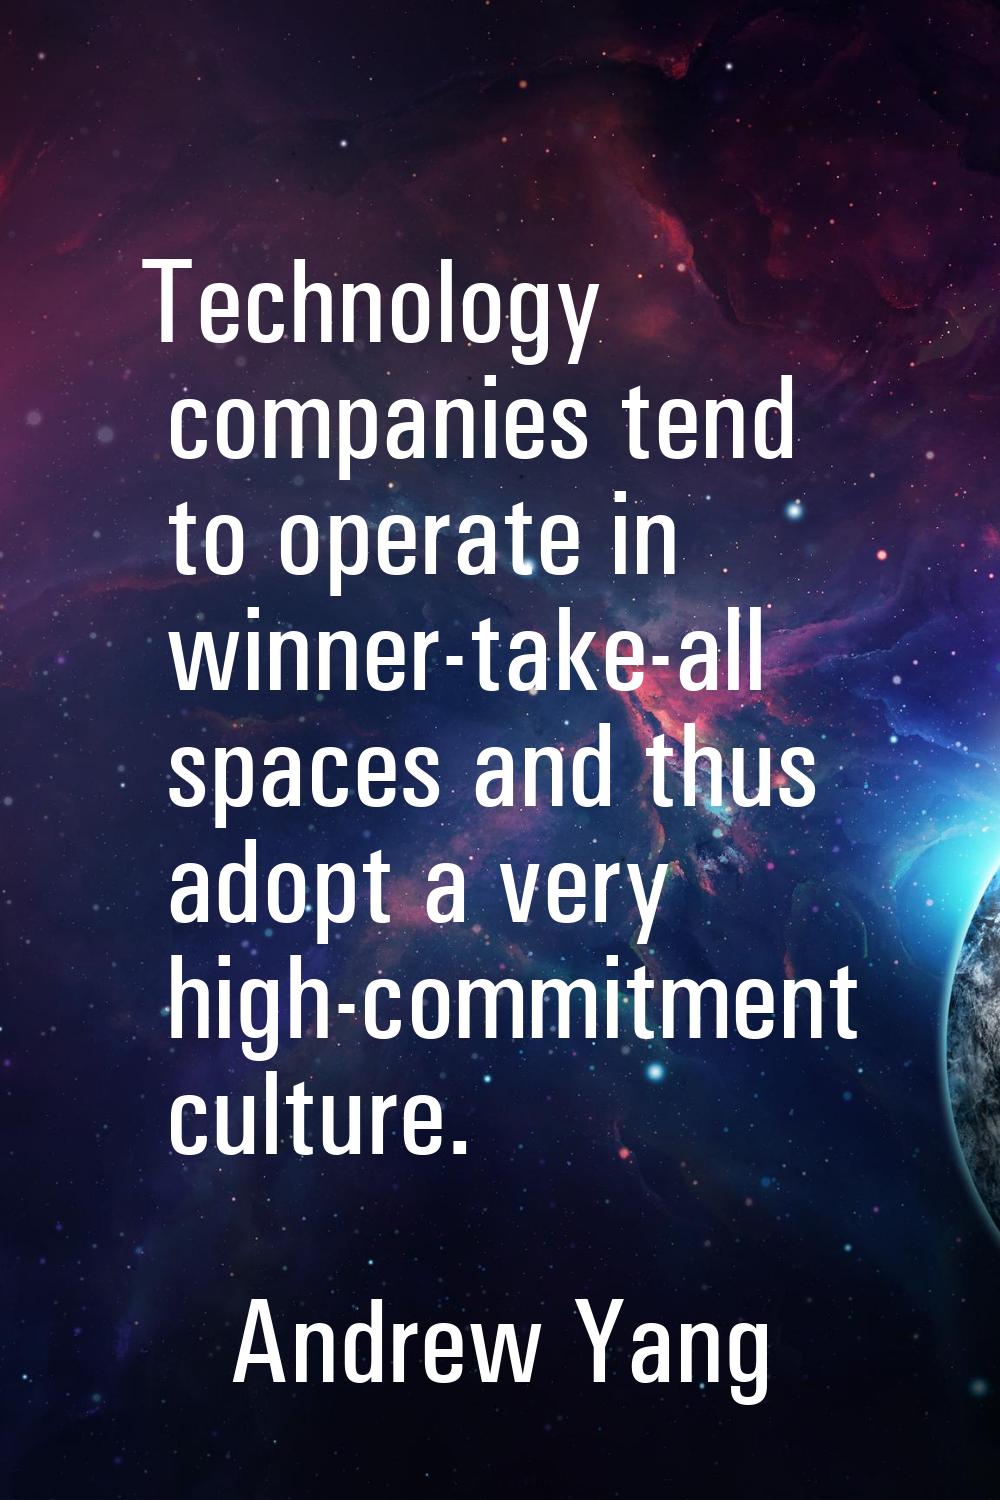 Technology companies tend to operate in winner-take-all spaces and thus adopt a very high-commitmen